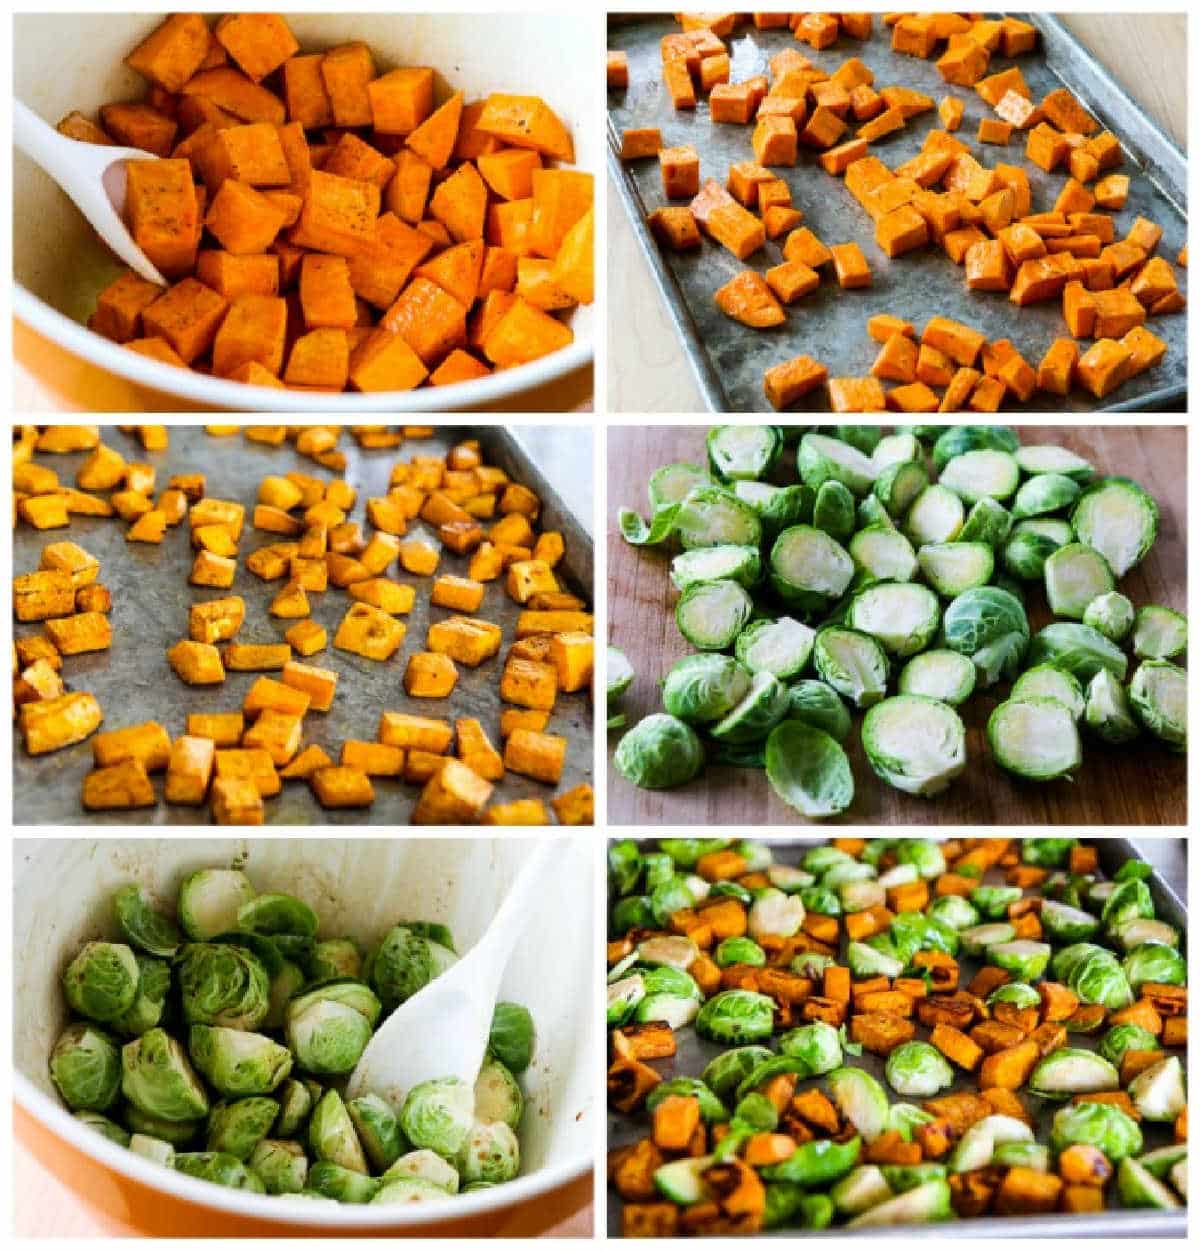 Collage of recipe steps for sweet potato and brussels sprouts